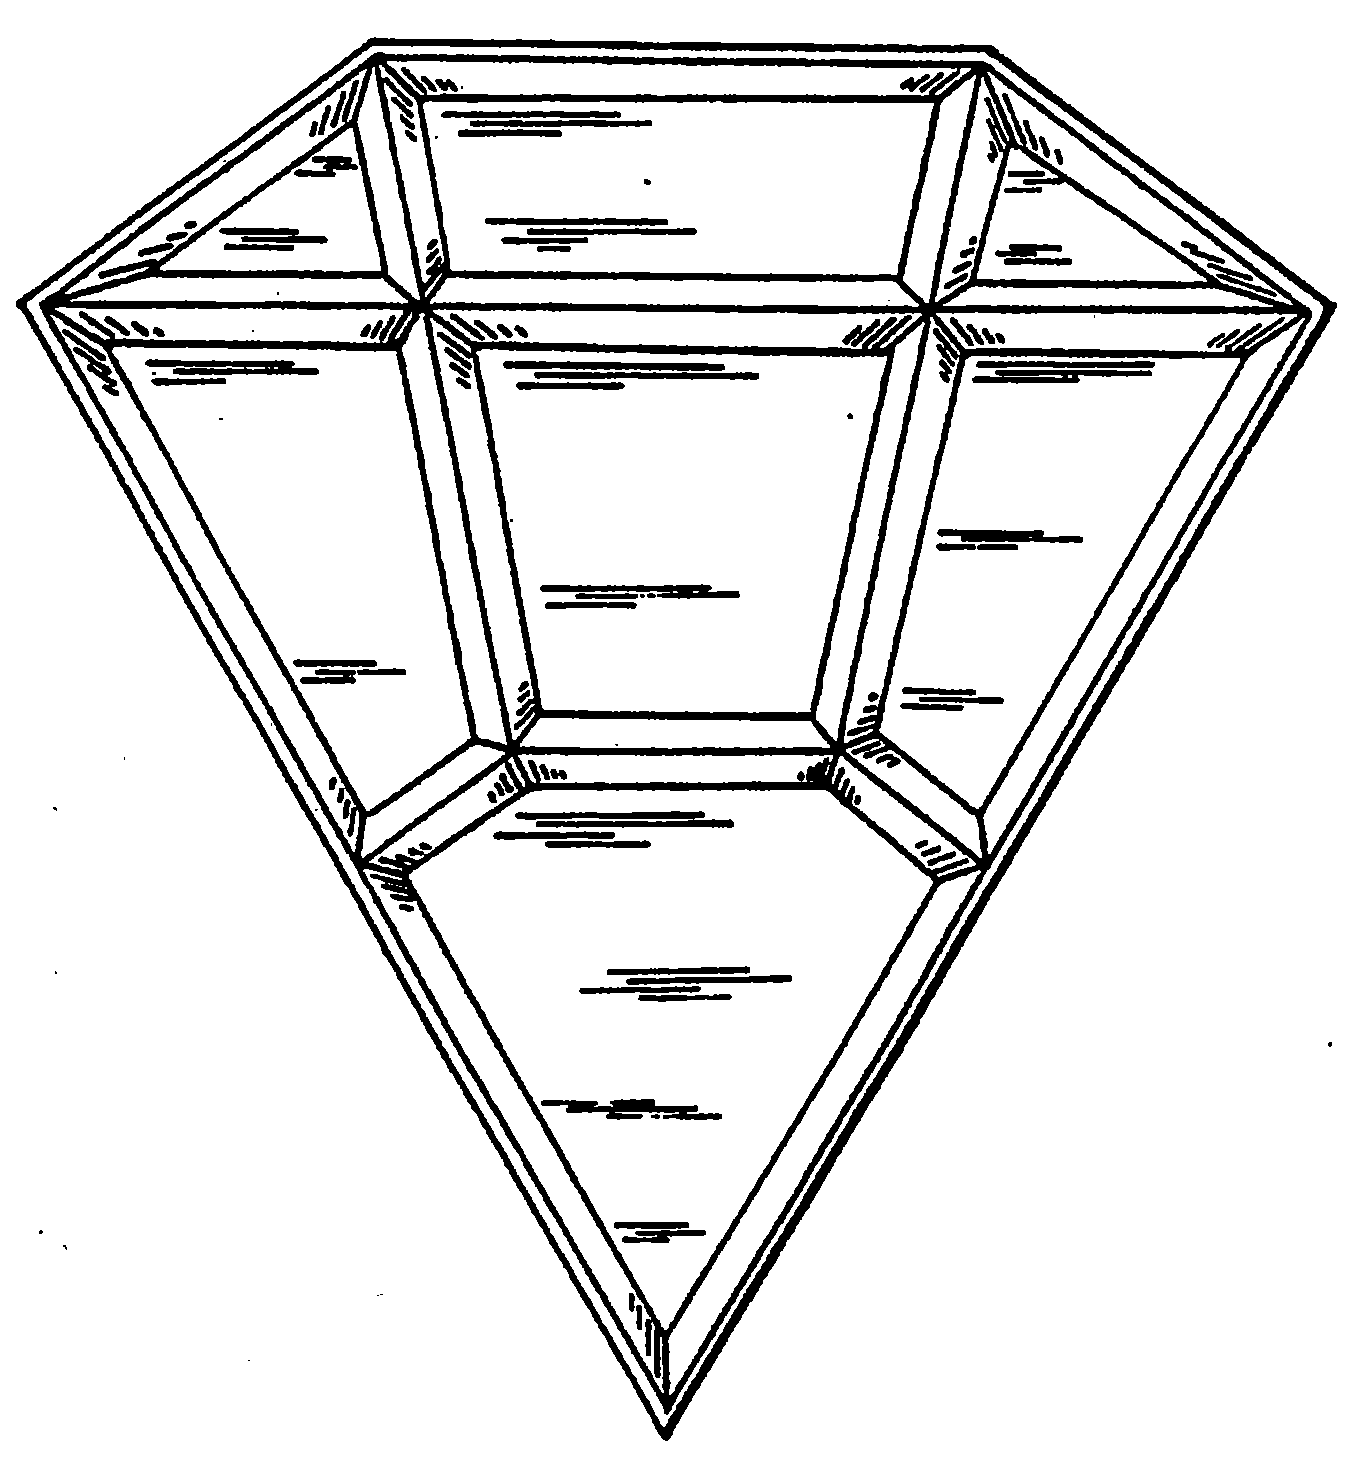 Example of a design for a symmetric compartmented tray. 
